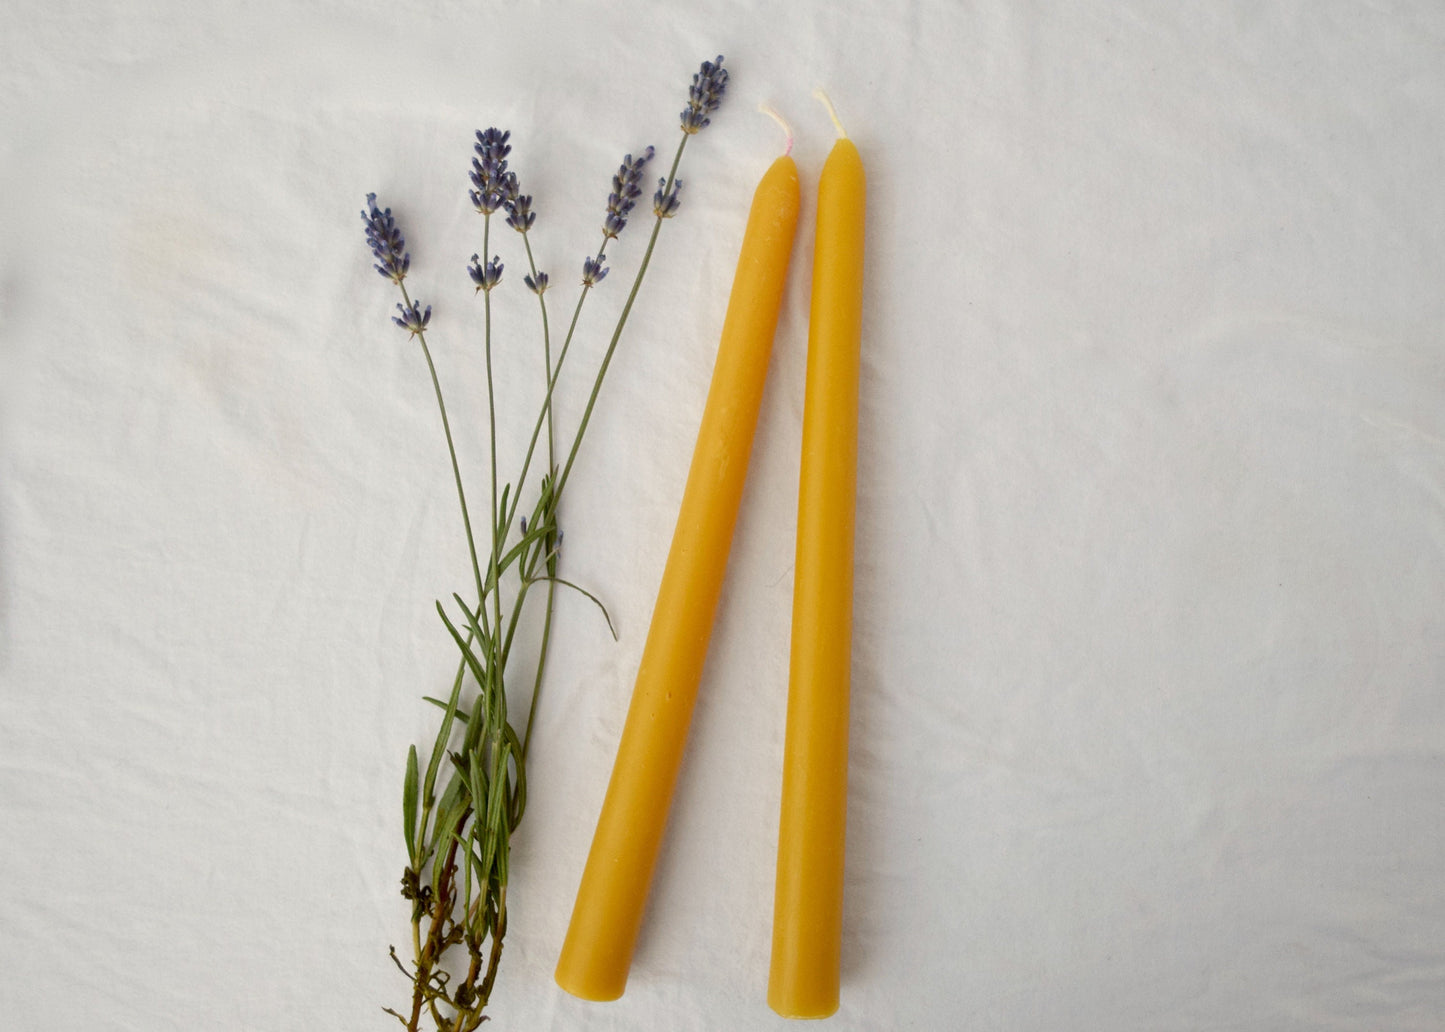 10" Tall Beeswax Taper Candles, 100% Pure Handfiltered Beeswax, Candles Pair of 2 // Tapers, Tapered Candles, Beeswax Candles